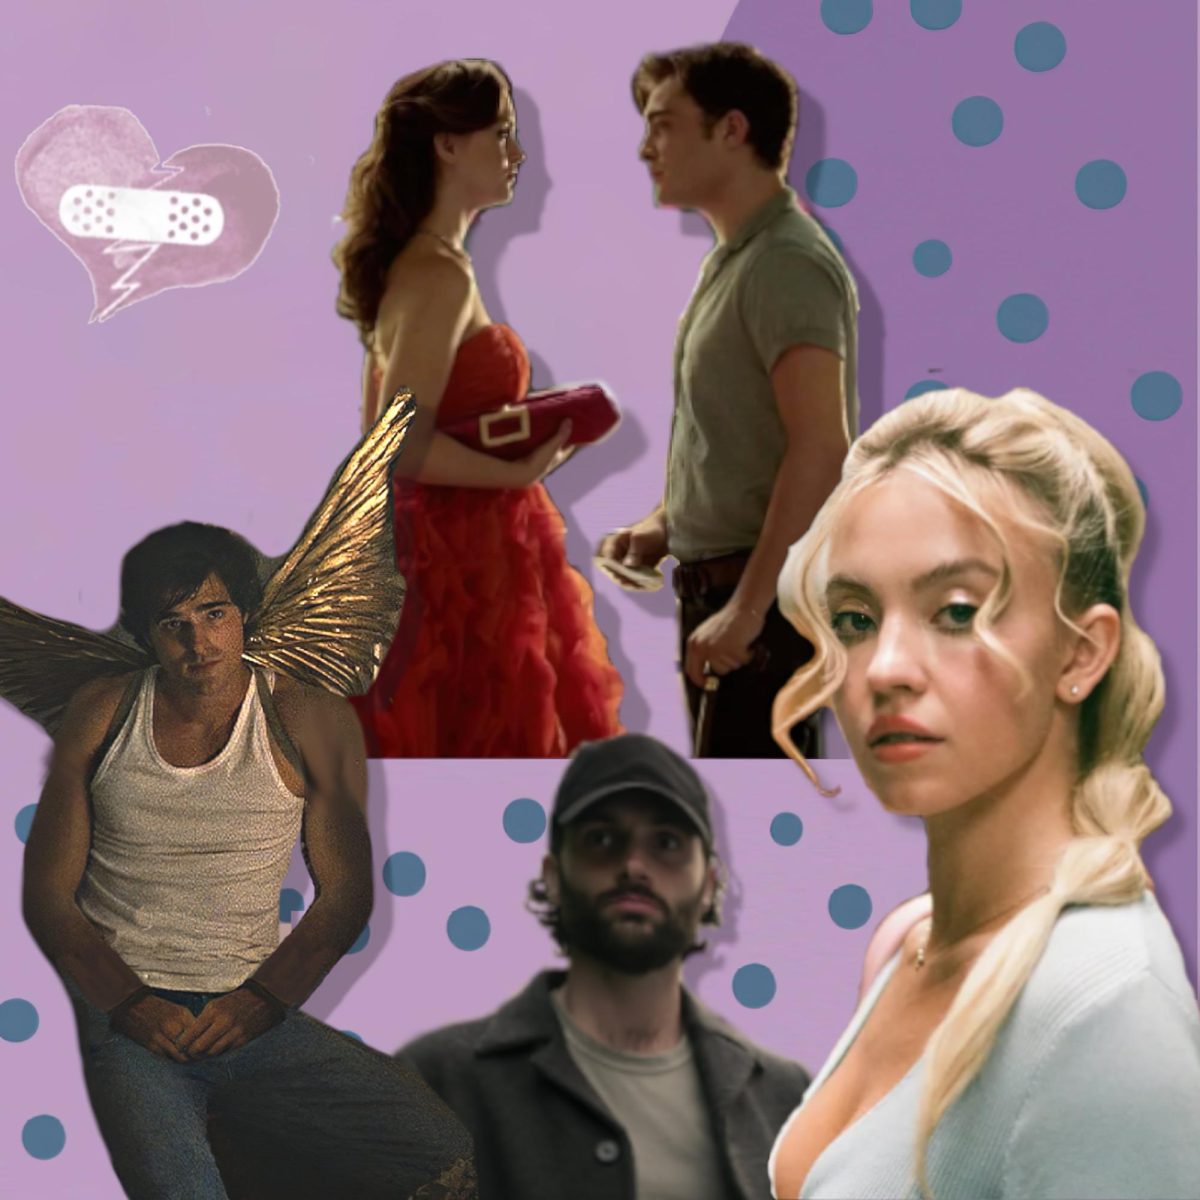 A graphic illustrating toxic characters from different TV shows such as Joe Goldberg, Blair Waldorf and Chuck Bass, ILLUSTRATED BY COBY NUNBERG/THE STATESMAN